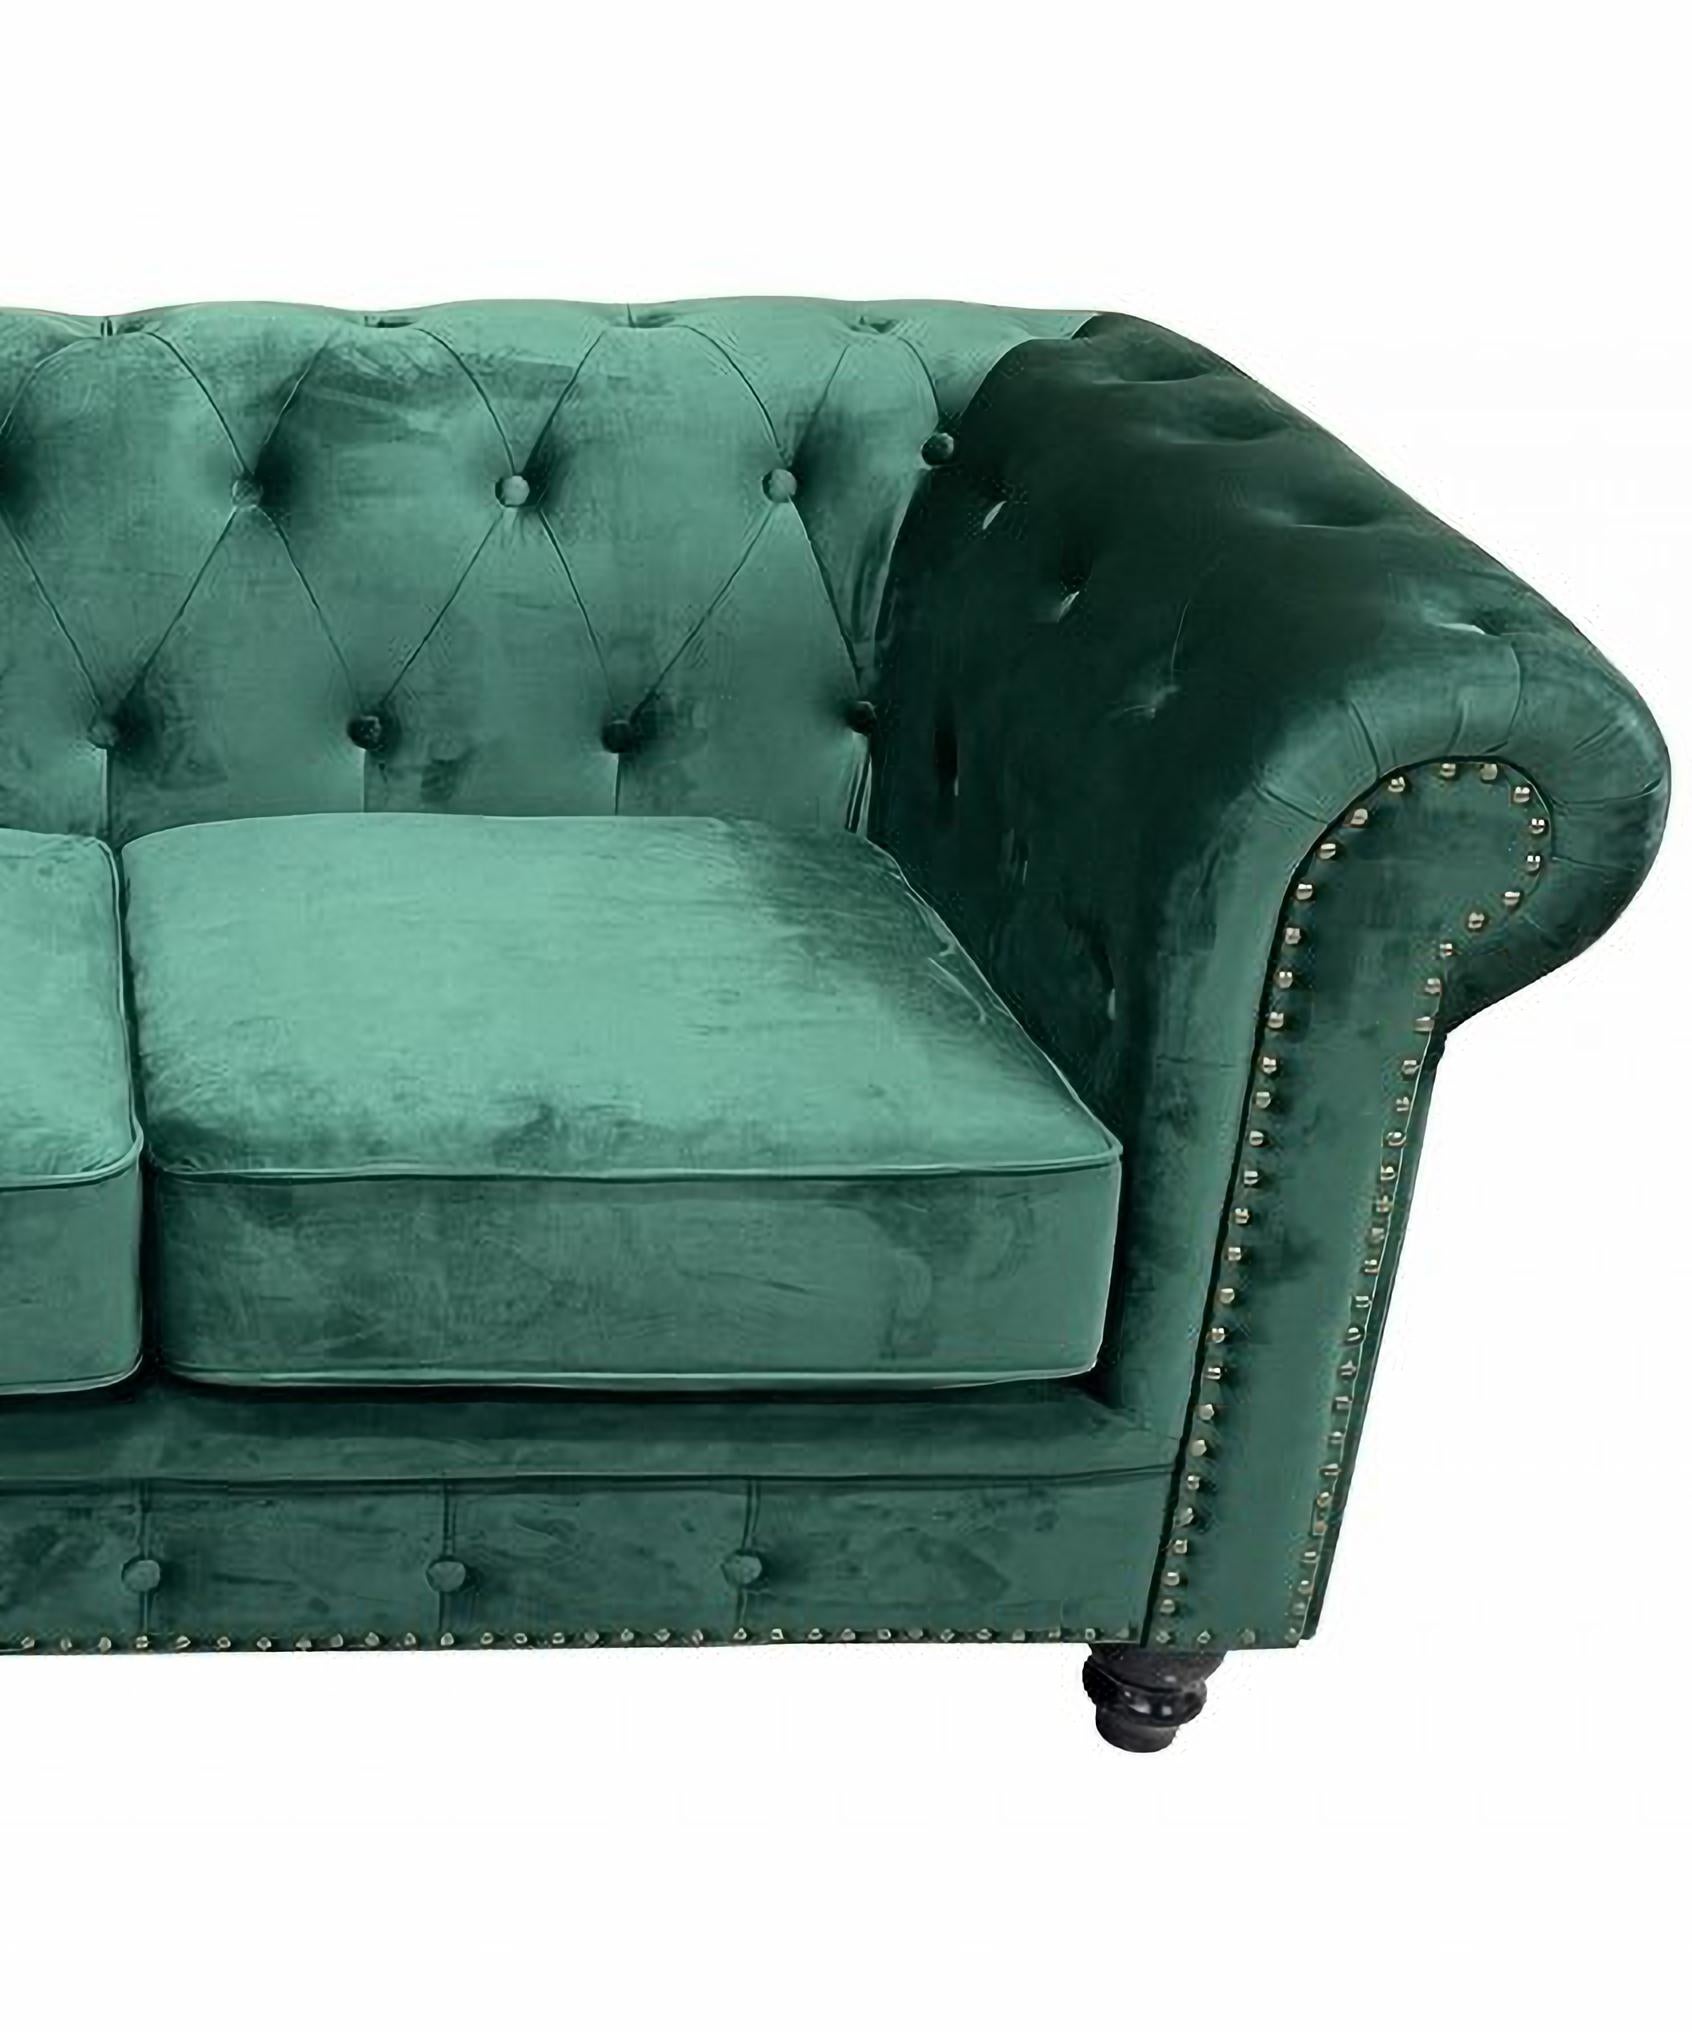 Chester Premium 2 seater sofa, green velvet upholstery

-Design sofa, 2 seats.

-Made with a solid wooden structure.

-High density polyurethane foam.

-Upholstered in navy blue velvet fabric

-2-seater sofa to match, optional

-Other